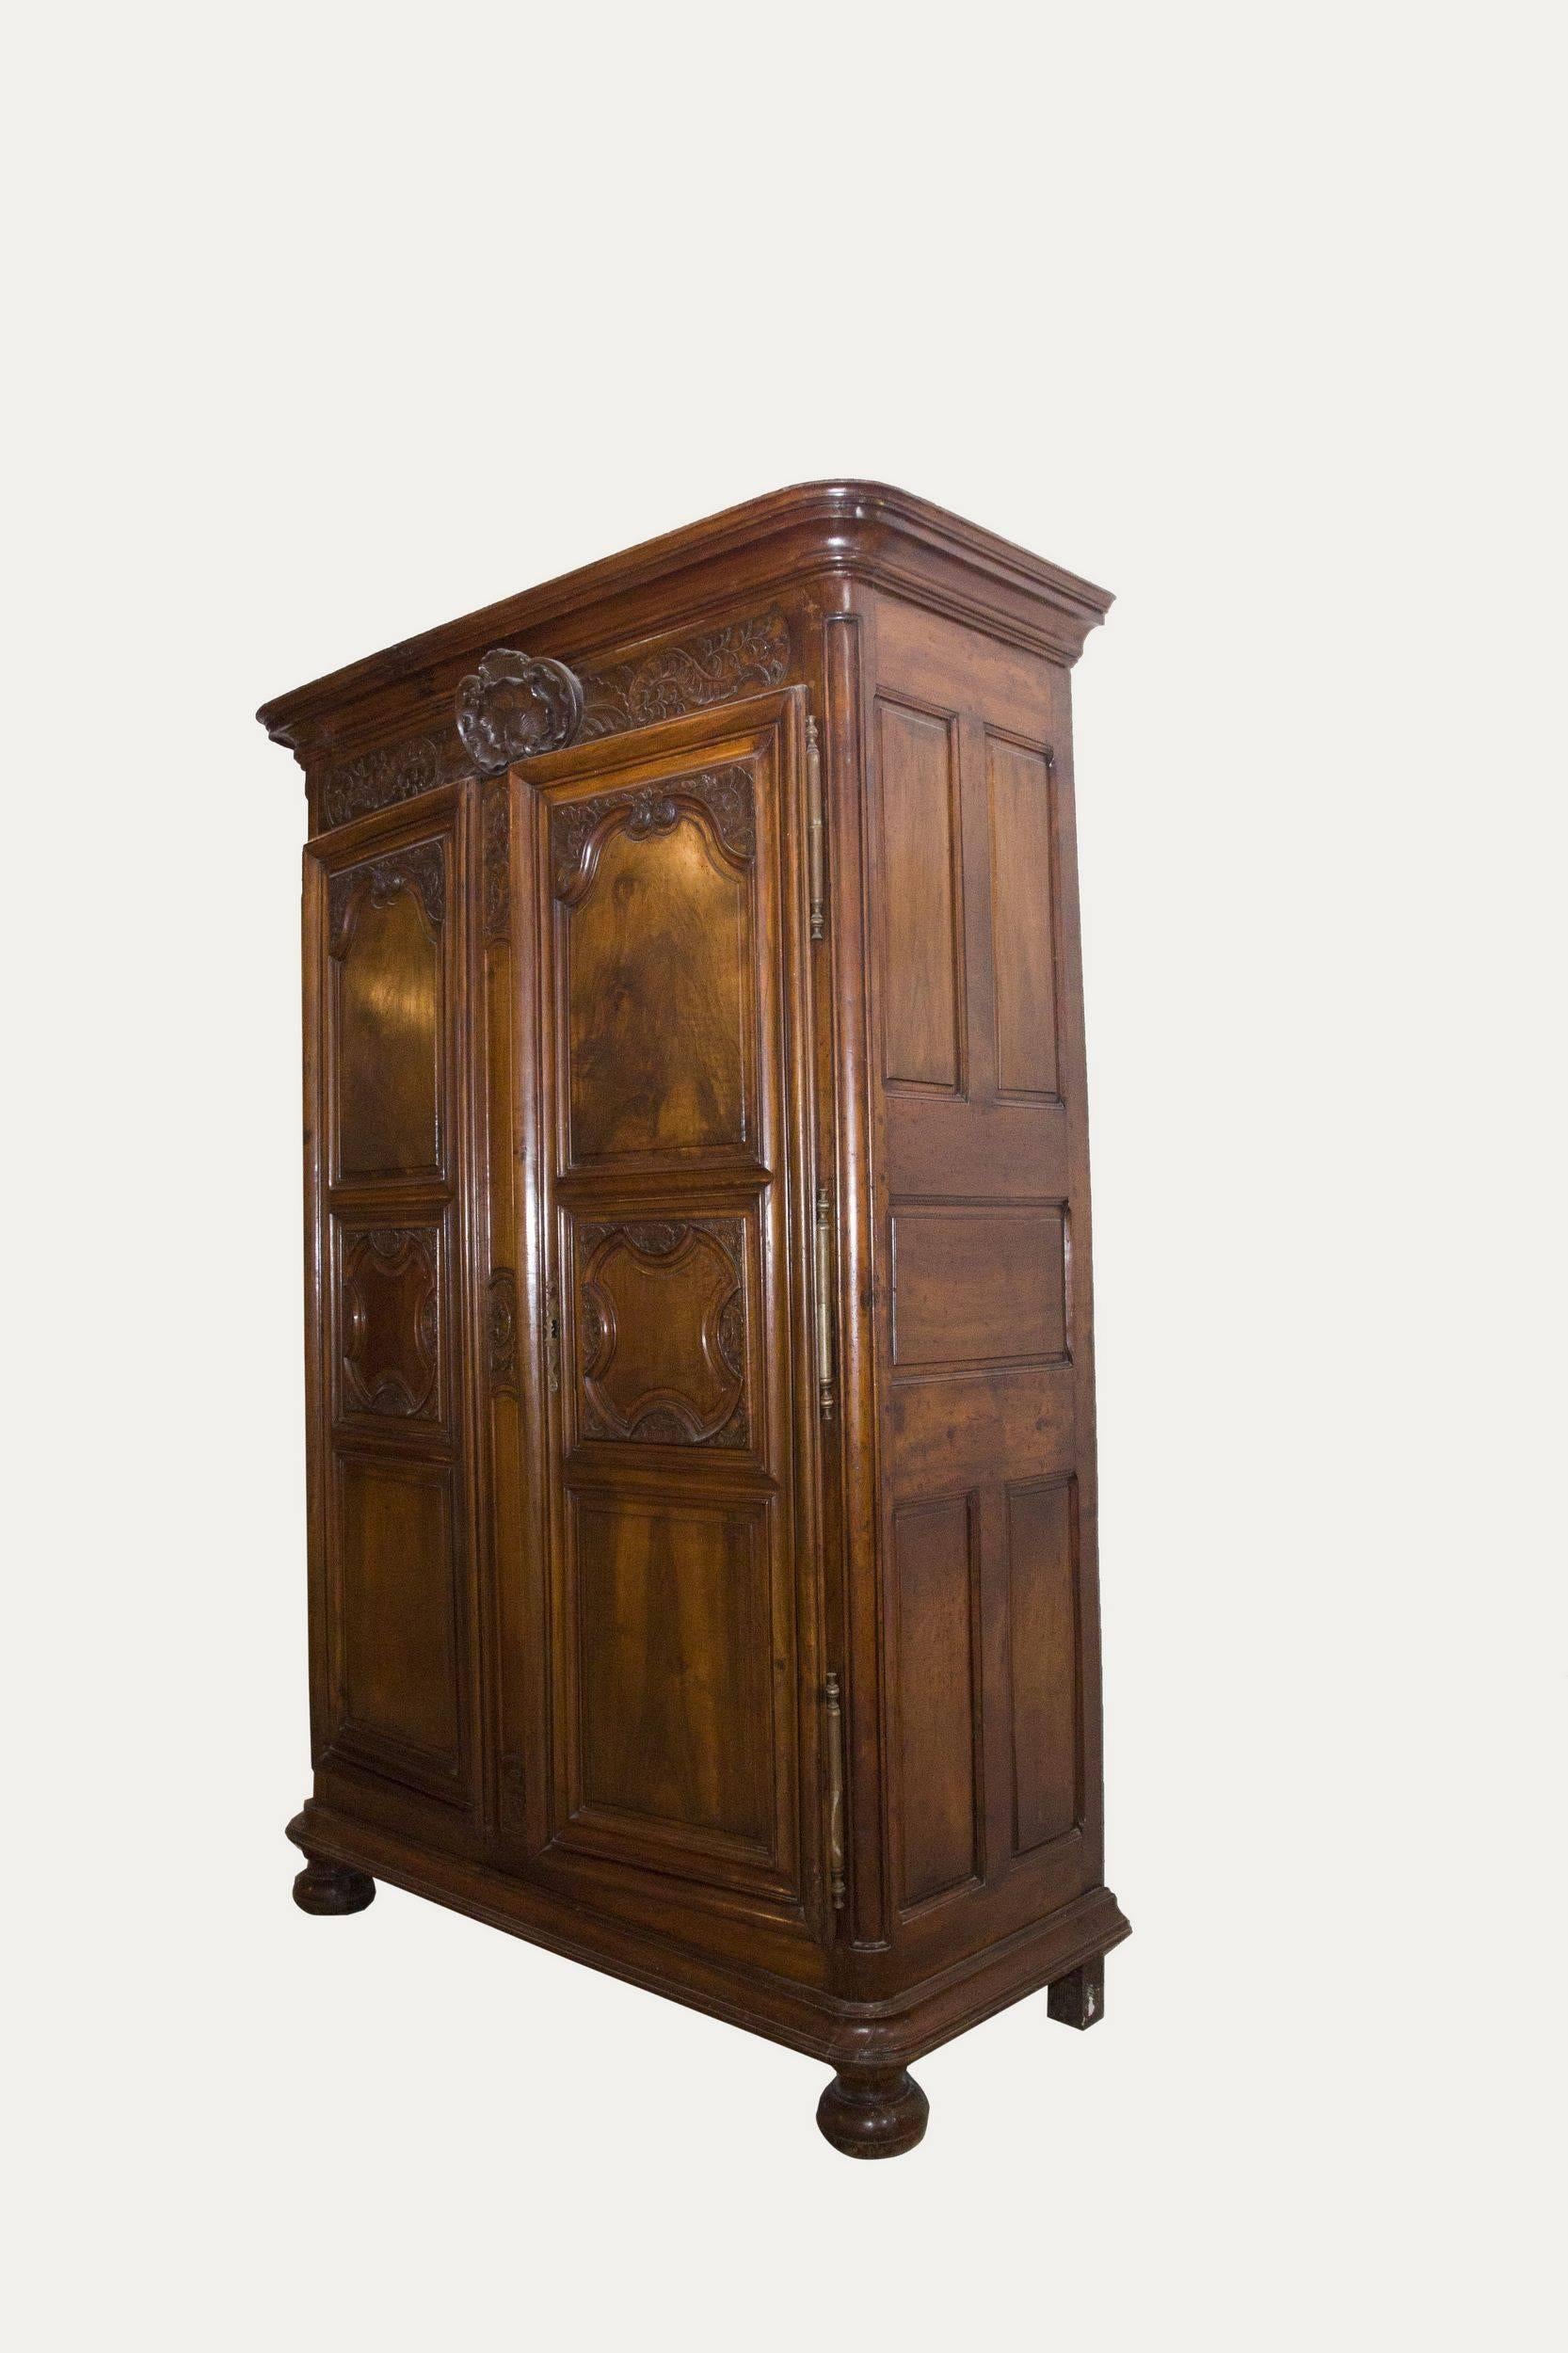 Louis XIV style French walnut wardrobe.
Beautiful carvings with shell pattern. Interior arrangement with two drawers and four adjustable shelves. 
Rounded front feet and cubic rear feet. Original fittings.
PLEASE NOTE THAT THE EXPORT AUTHORIZATION